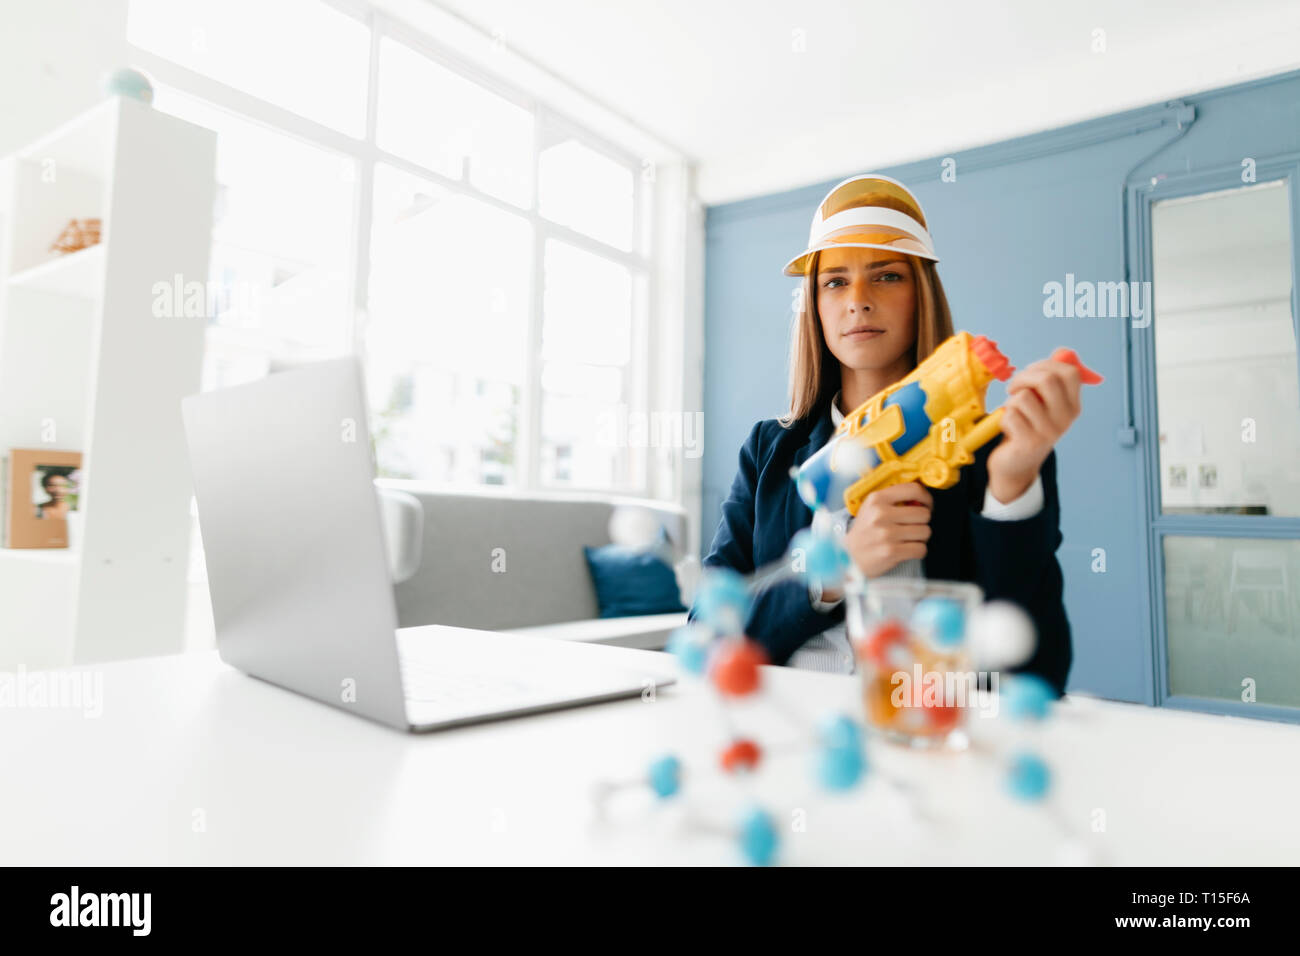 Female scientist holding water gun, studying molecules Stock Photo